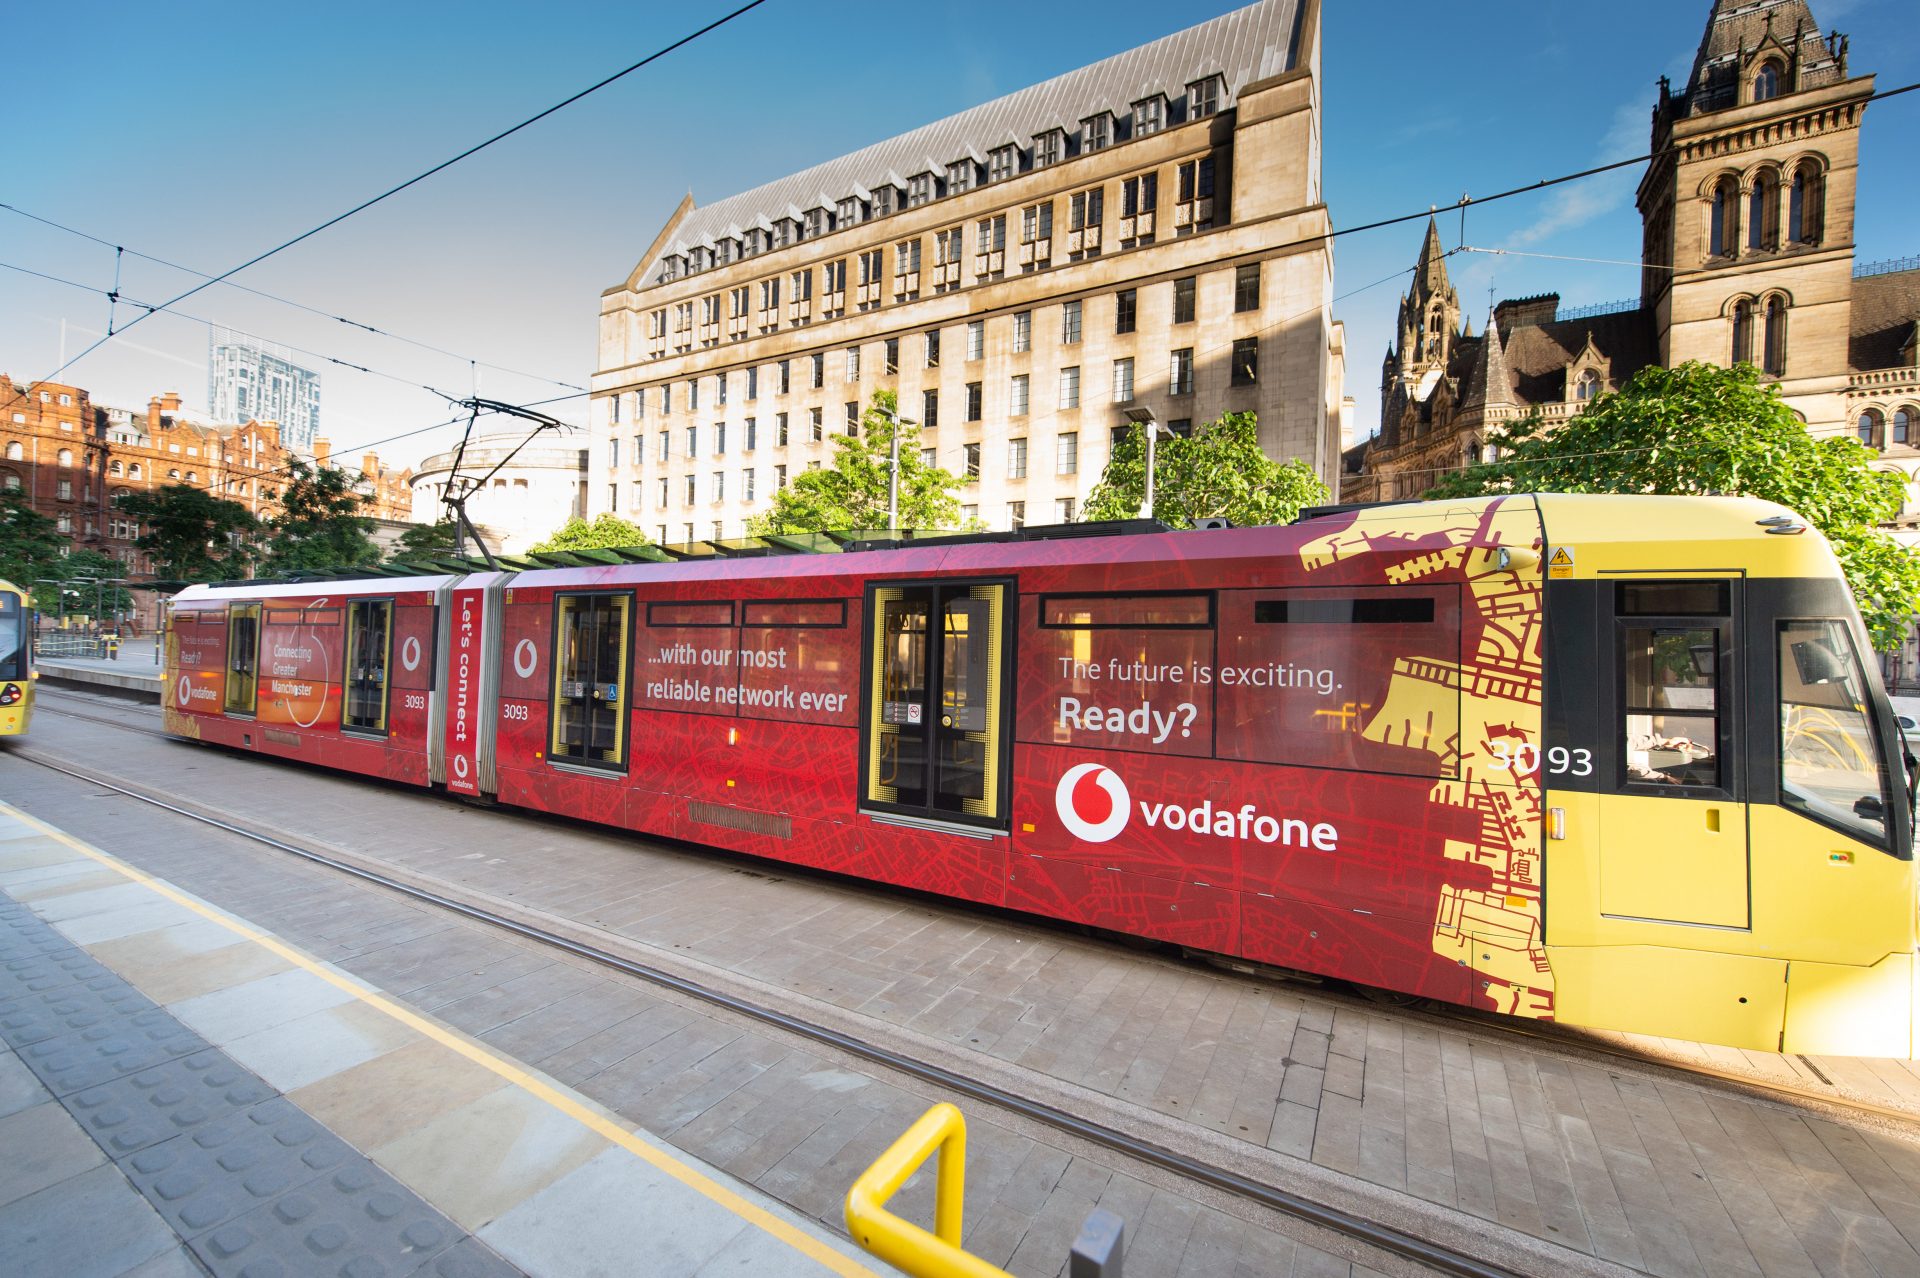 Photo of a #Vodafonetram passing through St Peter's Square, Manchester